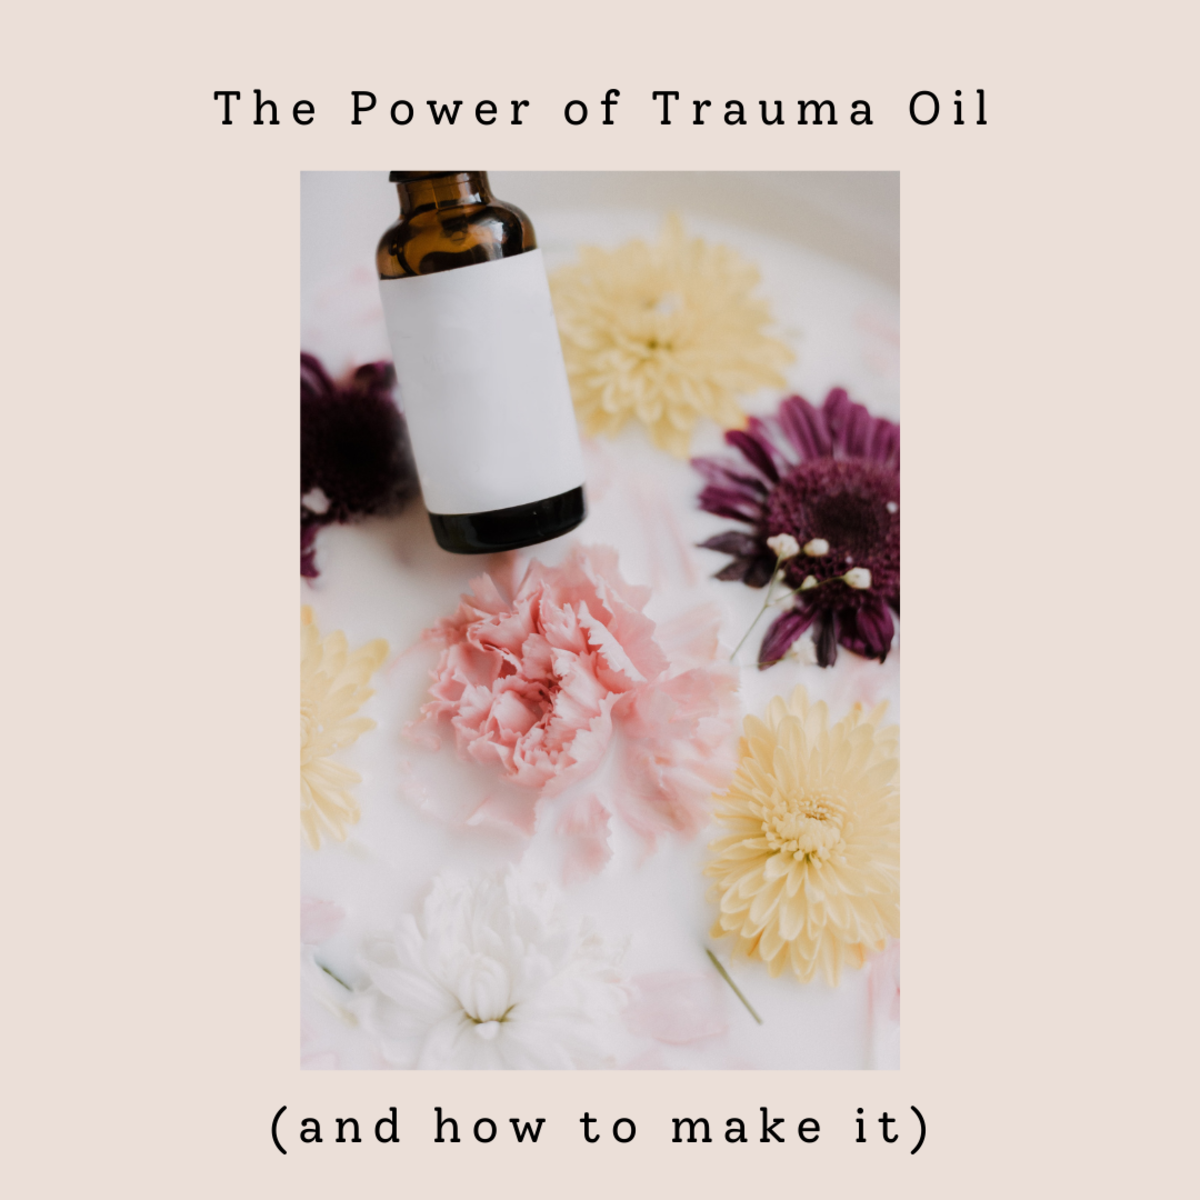 The Pain-Relieving, Inflammation-Reducing Power of Trauma Oil